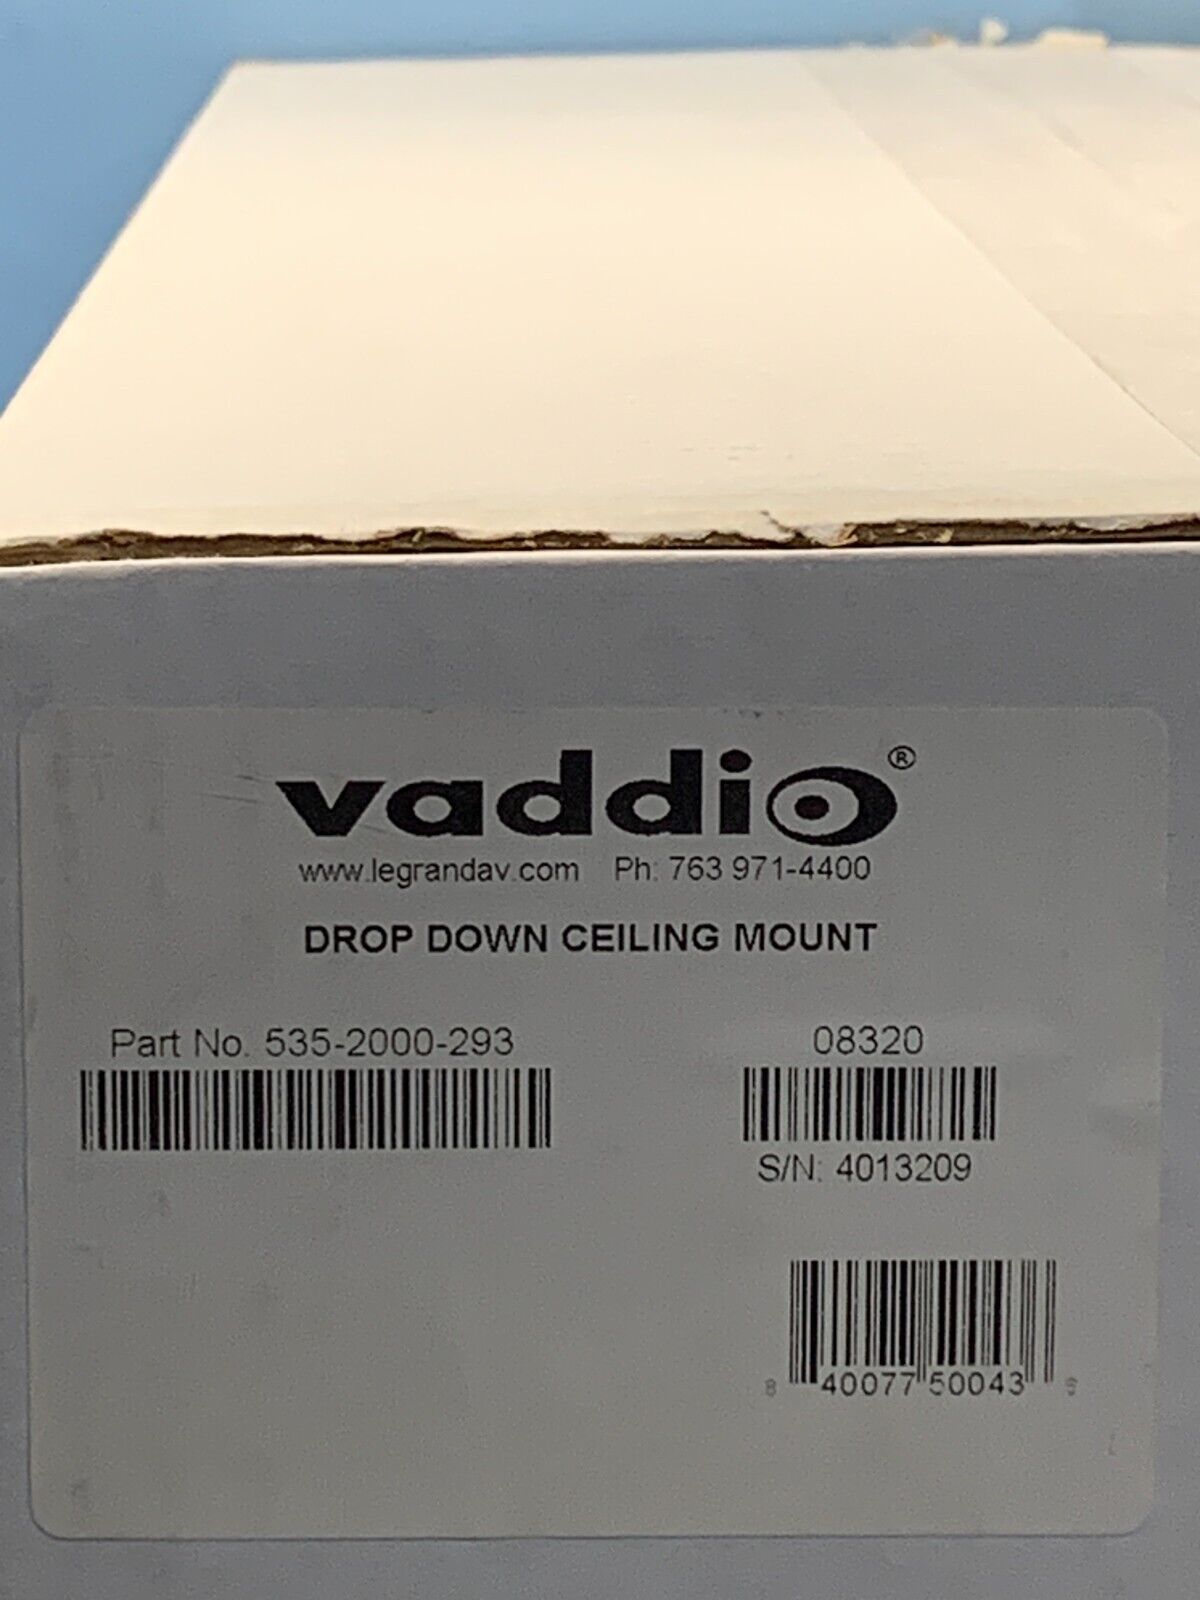 Vaddio 535-2000-293 Drop Down Ceiling Mount for Large PTZ Cameras - Long